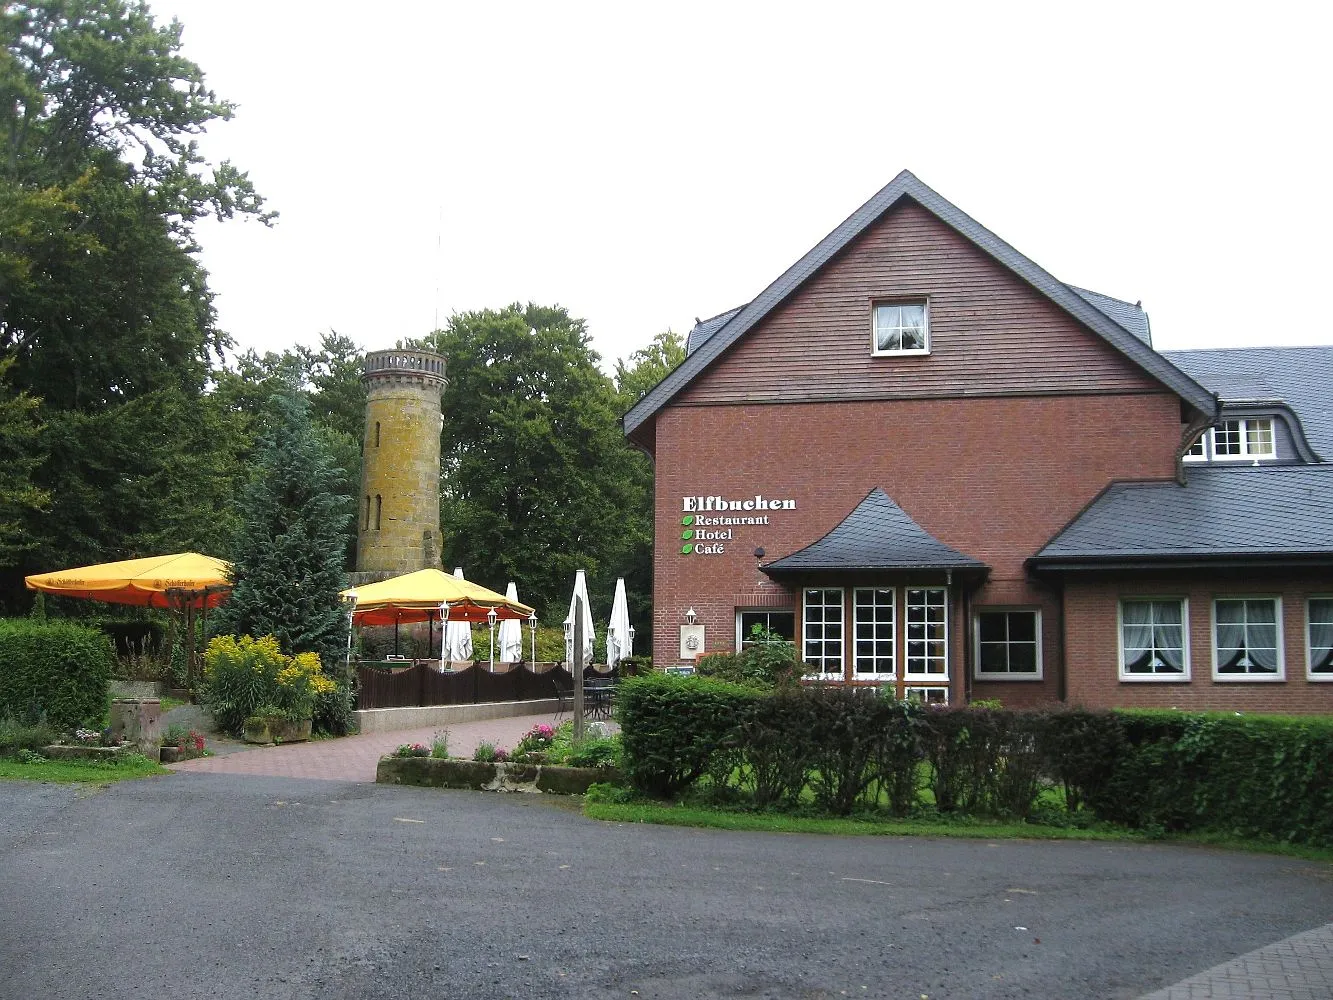 Photo showing: Germany / North Hesse / Tower "Elfbuchen" in the Habichtswald Mountains near Cassel (withoutlook-out).
In the front the hotel.